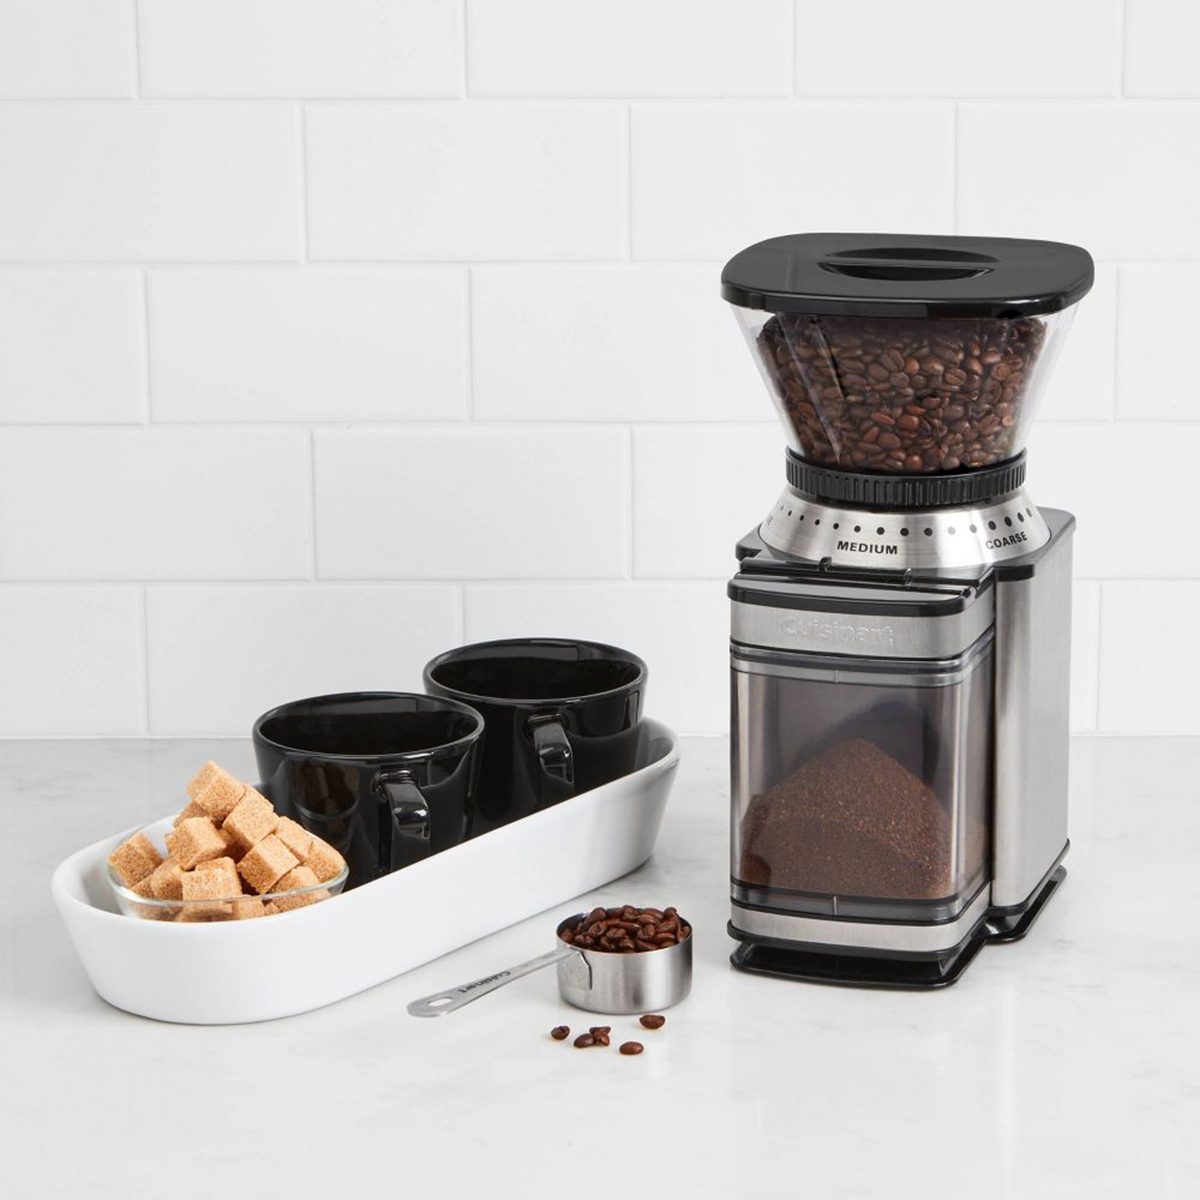 https://www.tasteofhome.com/wp-content/uploads/2022/03/21-Best-Coffee-Bar-Accessories-for-the-At-Home-Barista_FT_via-amazon.com_.jpg